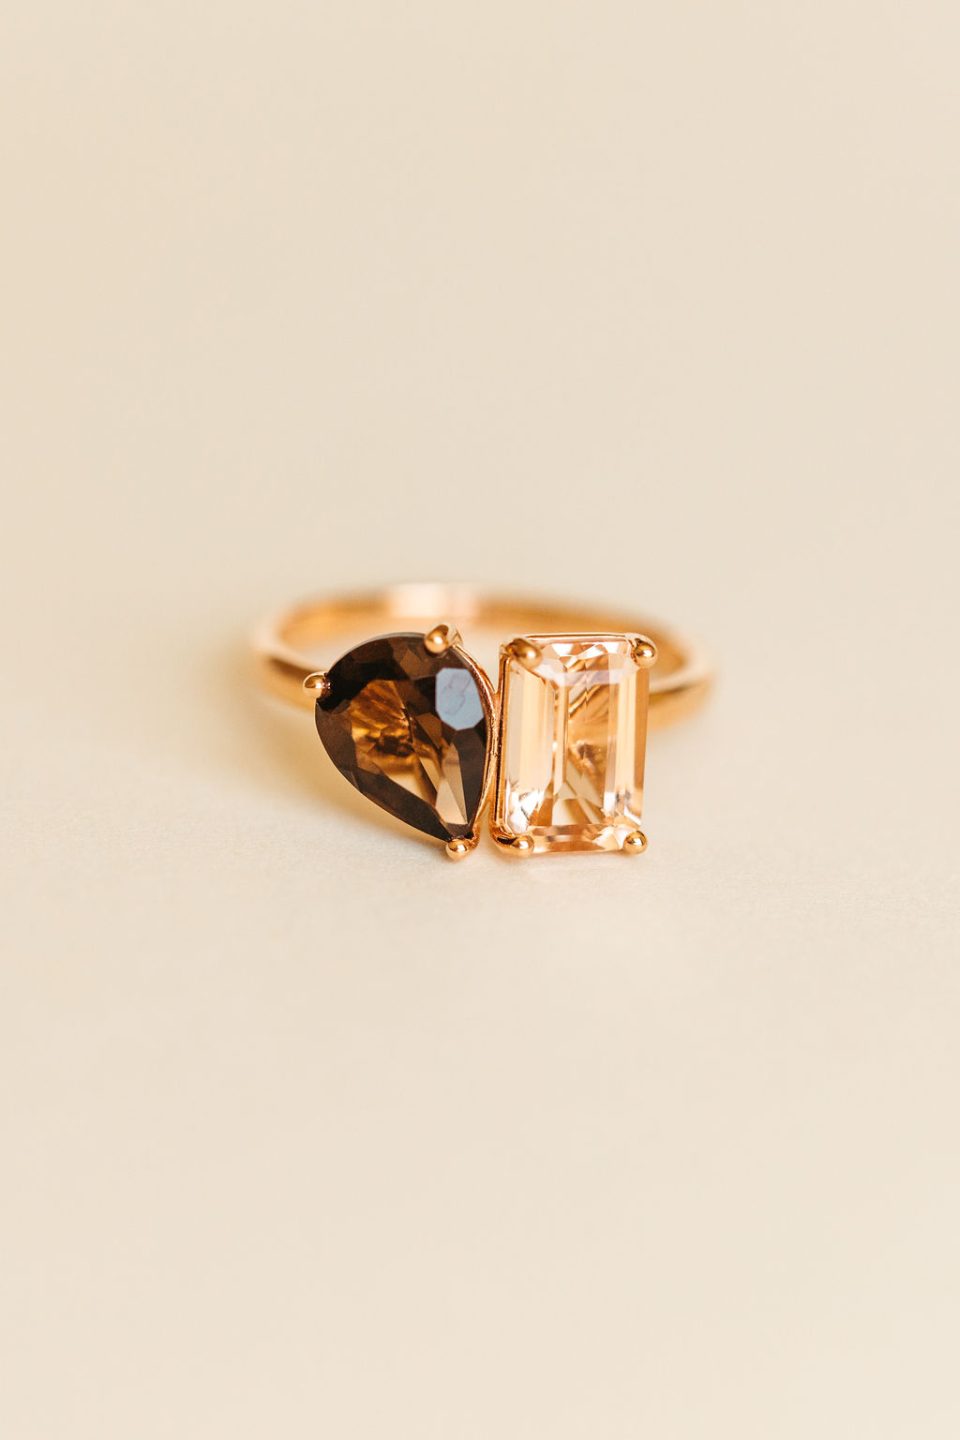 Toi et Moi Ring with Morganite and Smokey Quartz in 14kt Rose Gold